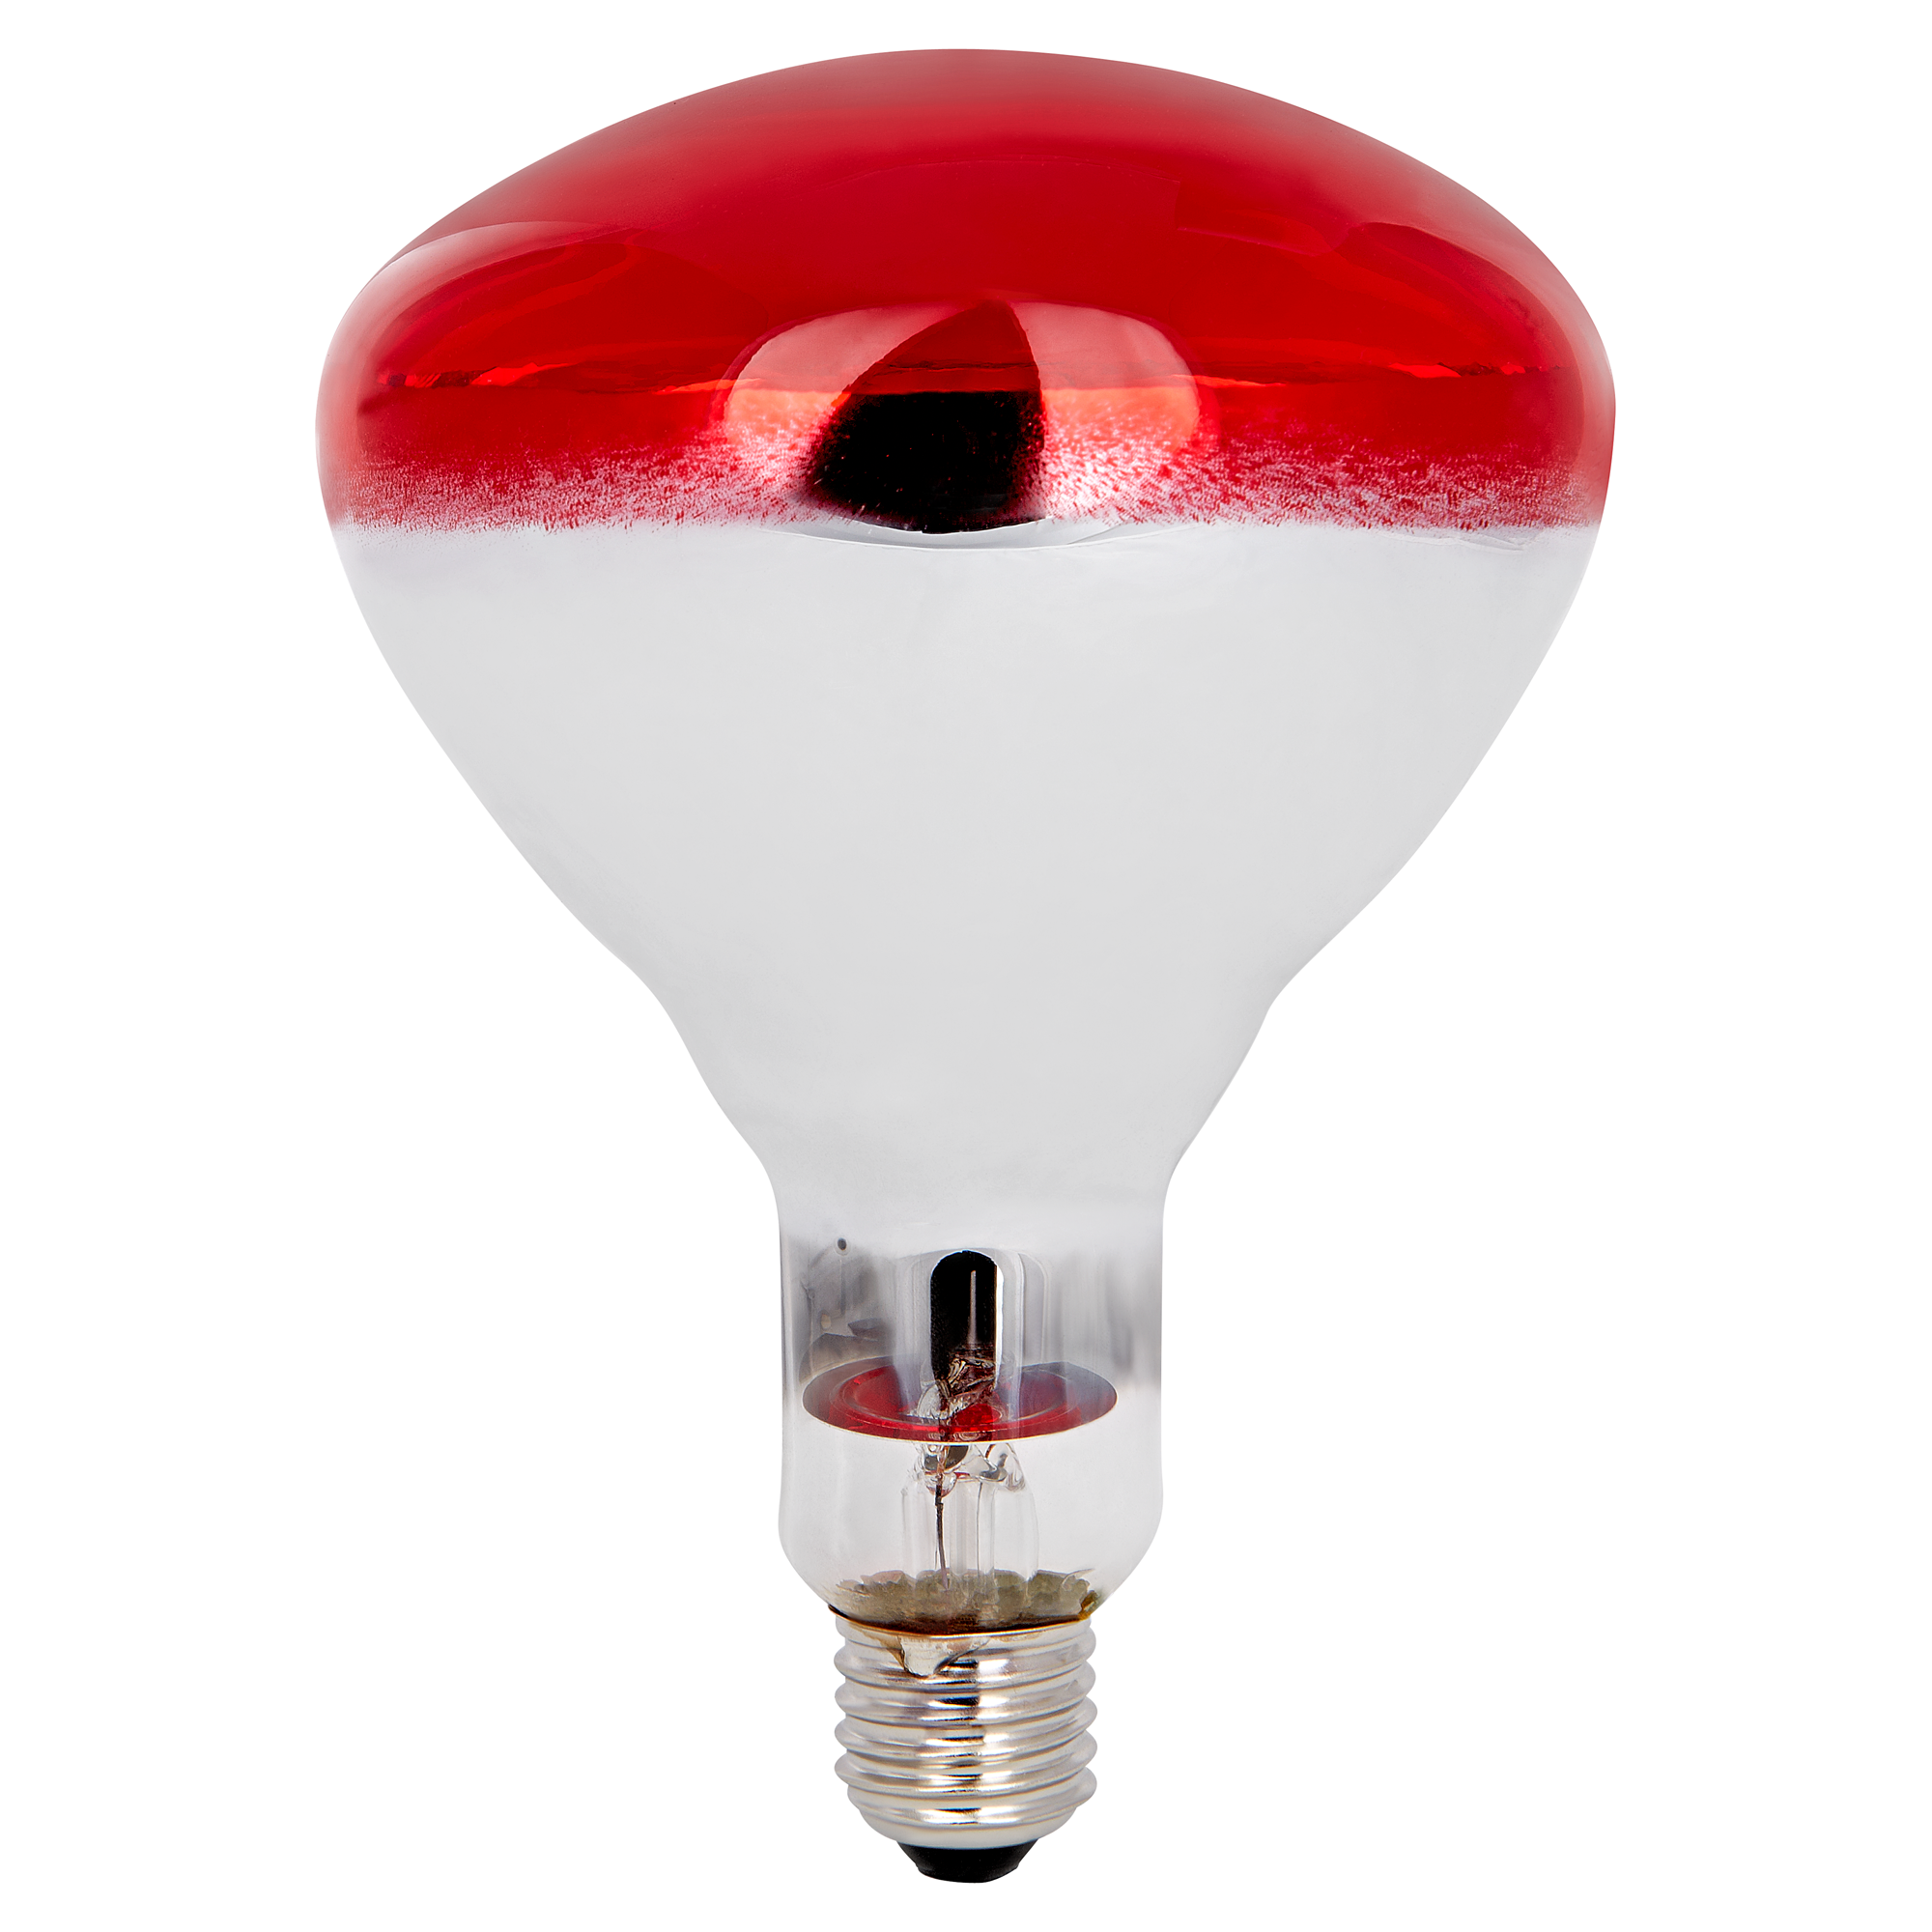 Infrarot-Lampe E27, 250W + product picture